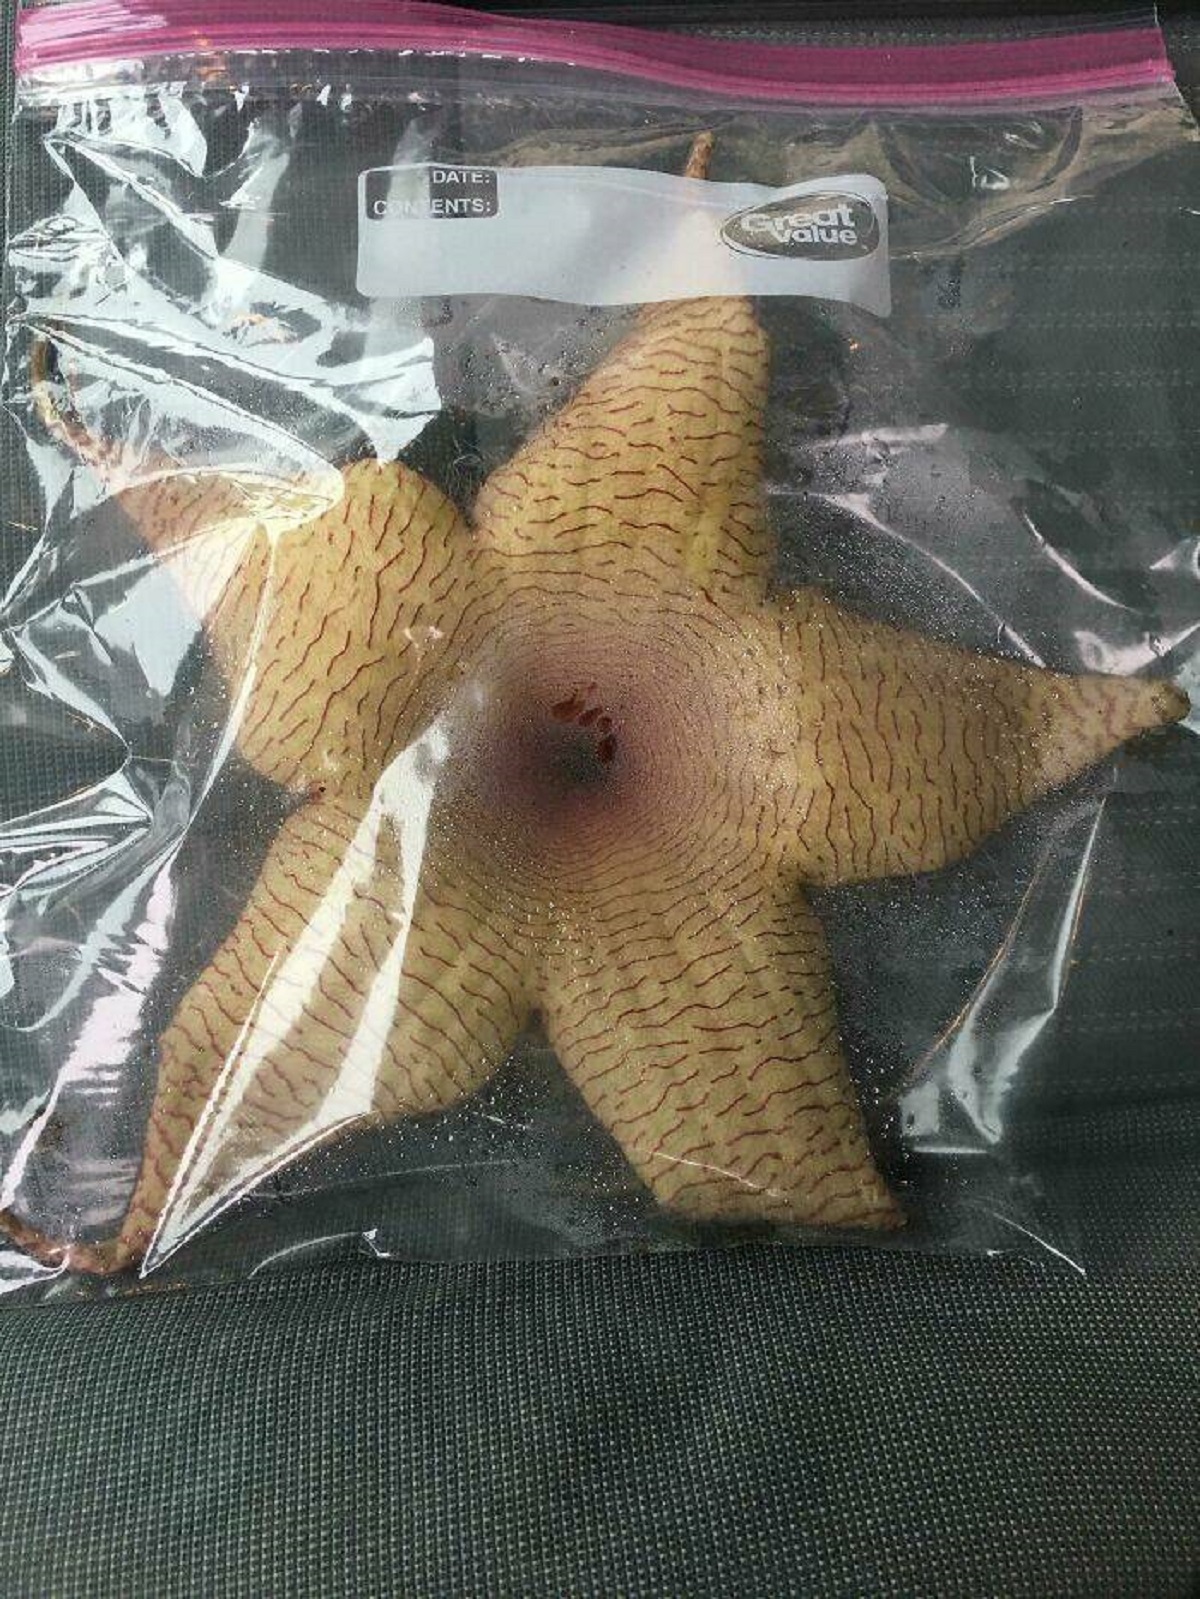 "Our Hr Team Just Received A Stapelia Flower As A Thank You From A Candidate. There's A Note Warning Not To Touch It Because It Will Sting And Not To Smell It Because It Smells Like Rotten Flesh"